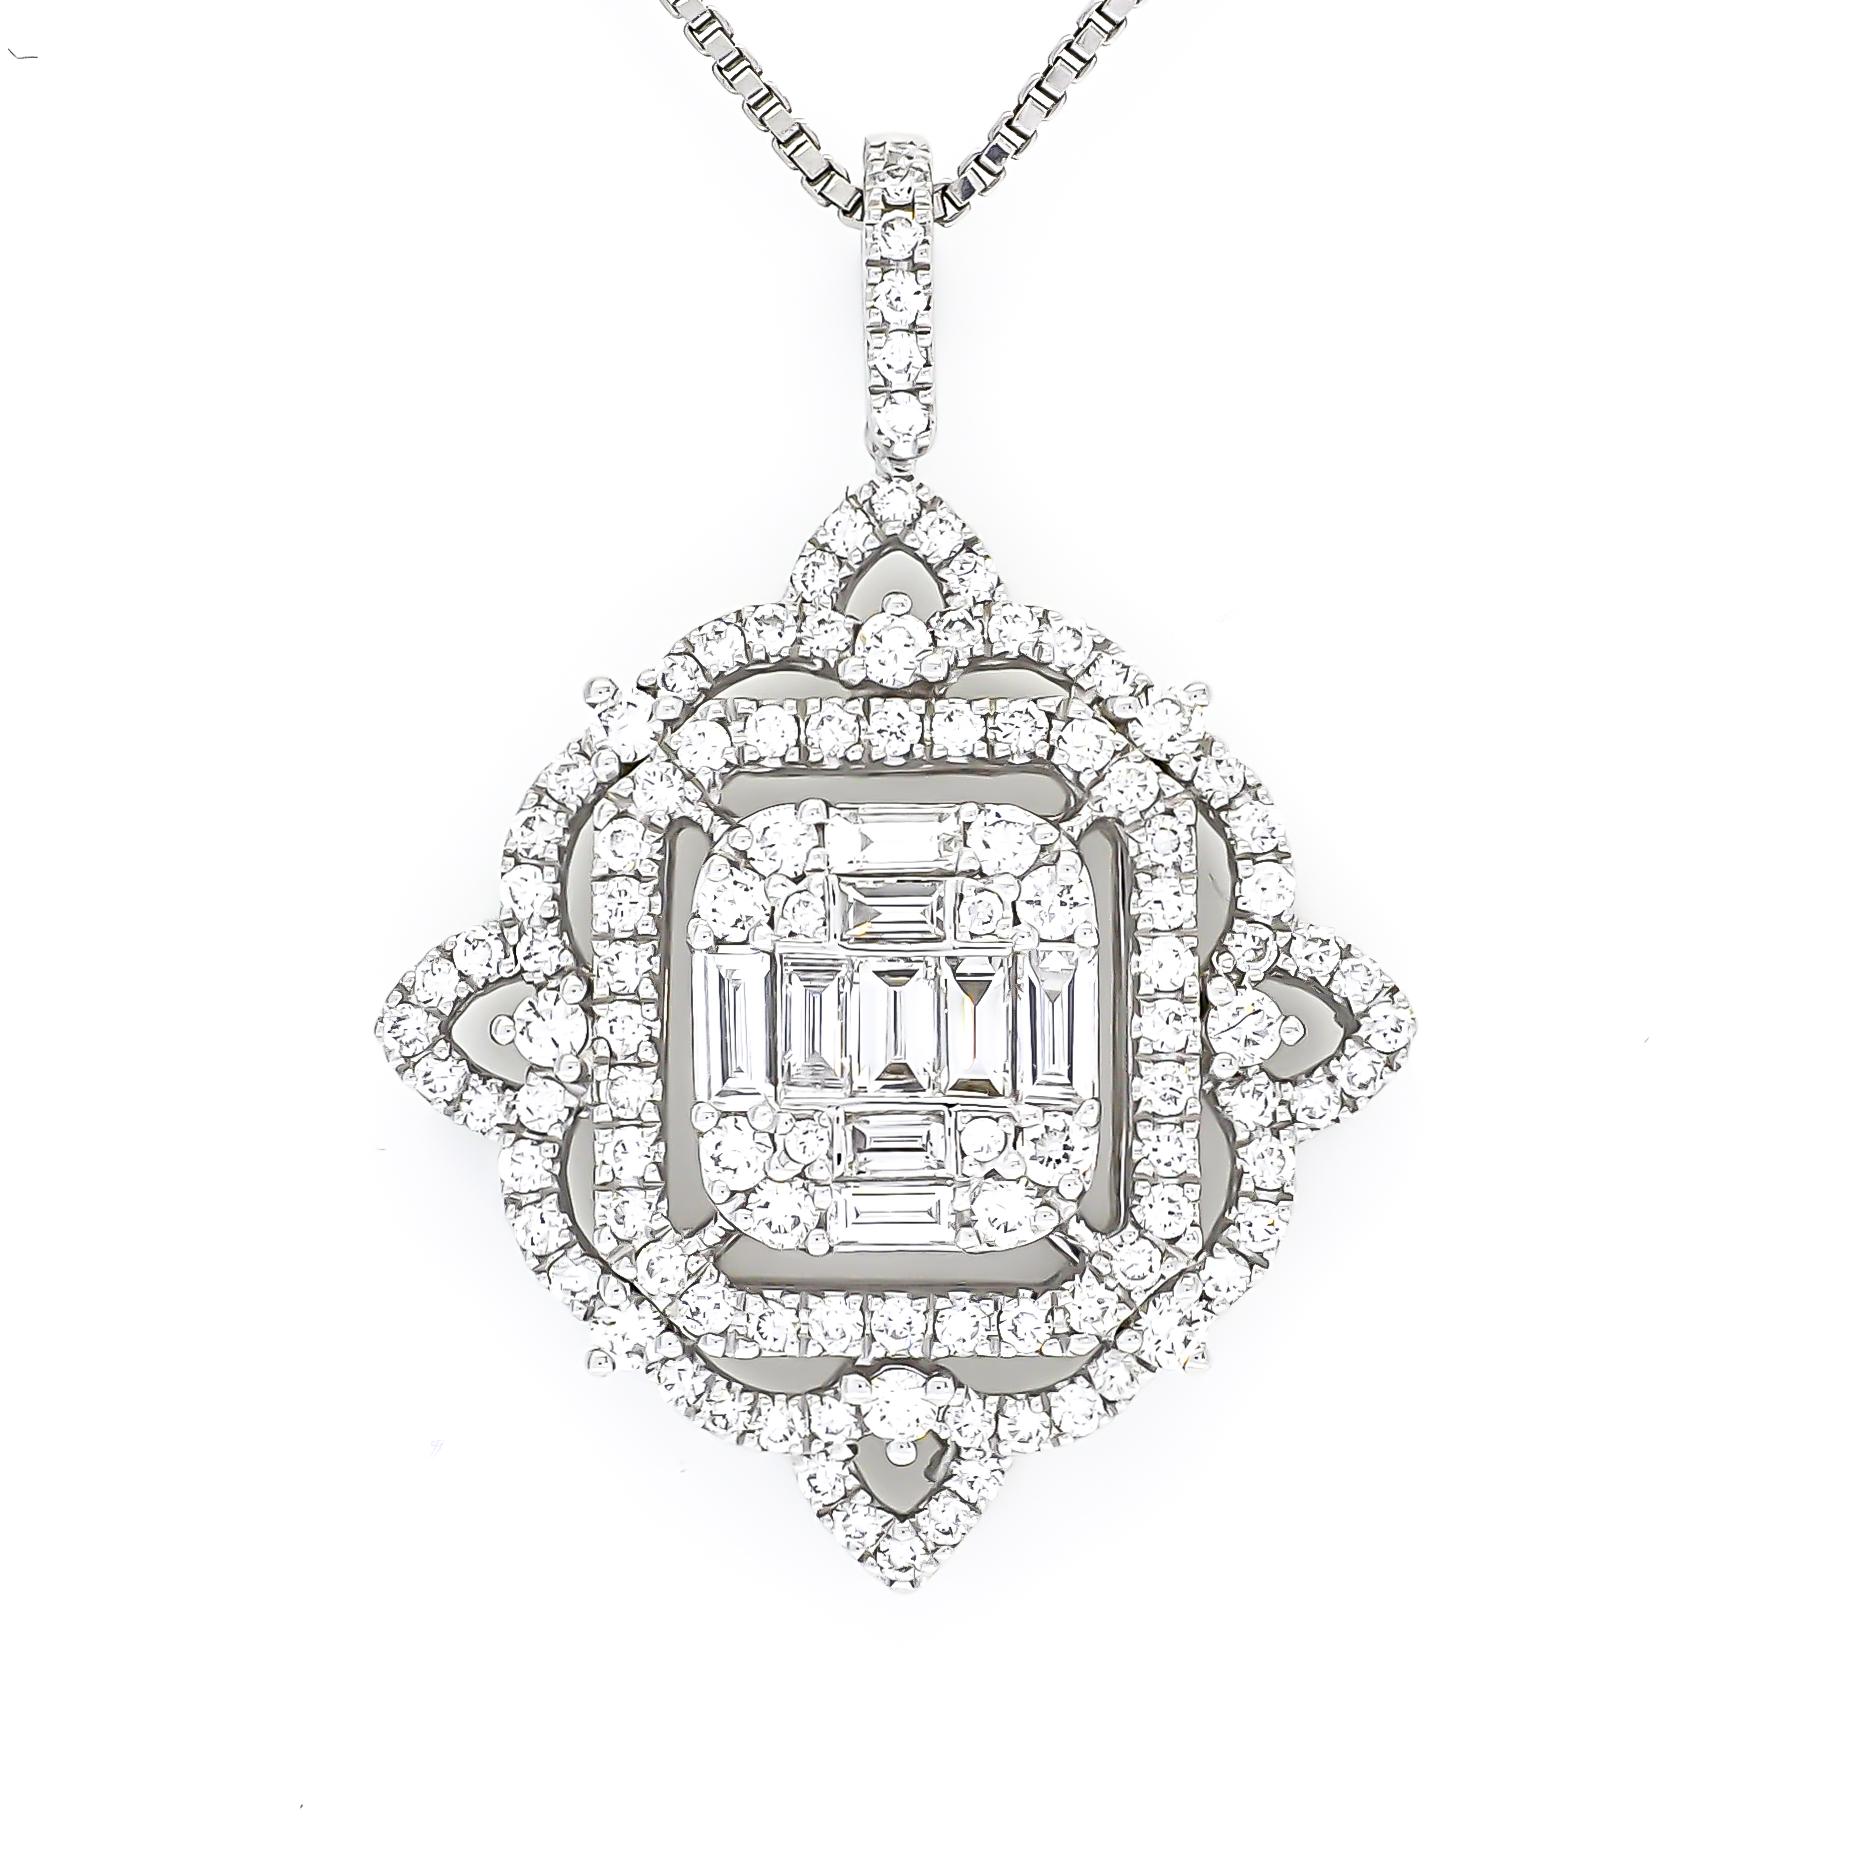 Make sparkle a priority with this elegant baguette and Round diamond Cluster Halo with a delicate design open work around the cluster in this pendant necklace.

Inspired by the era of elegance, this vintage-style pendant necklace is designed with